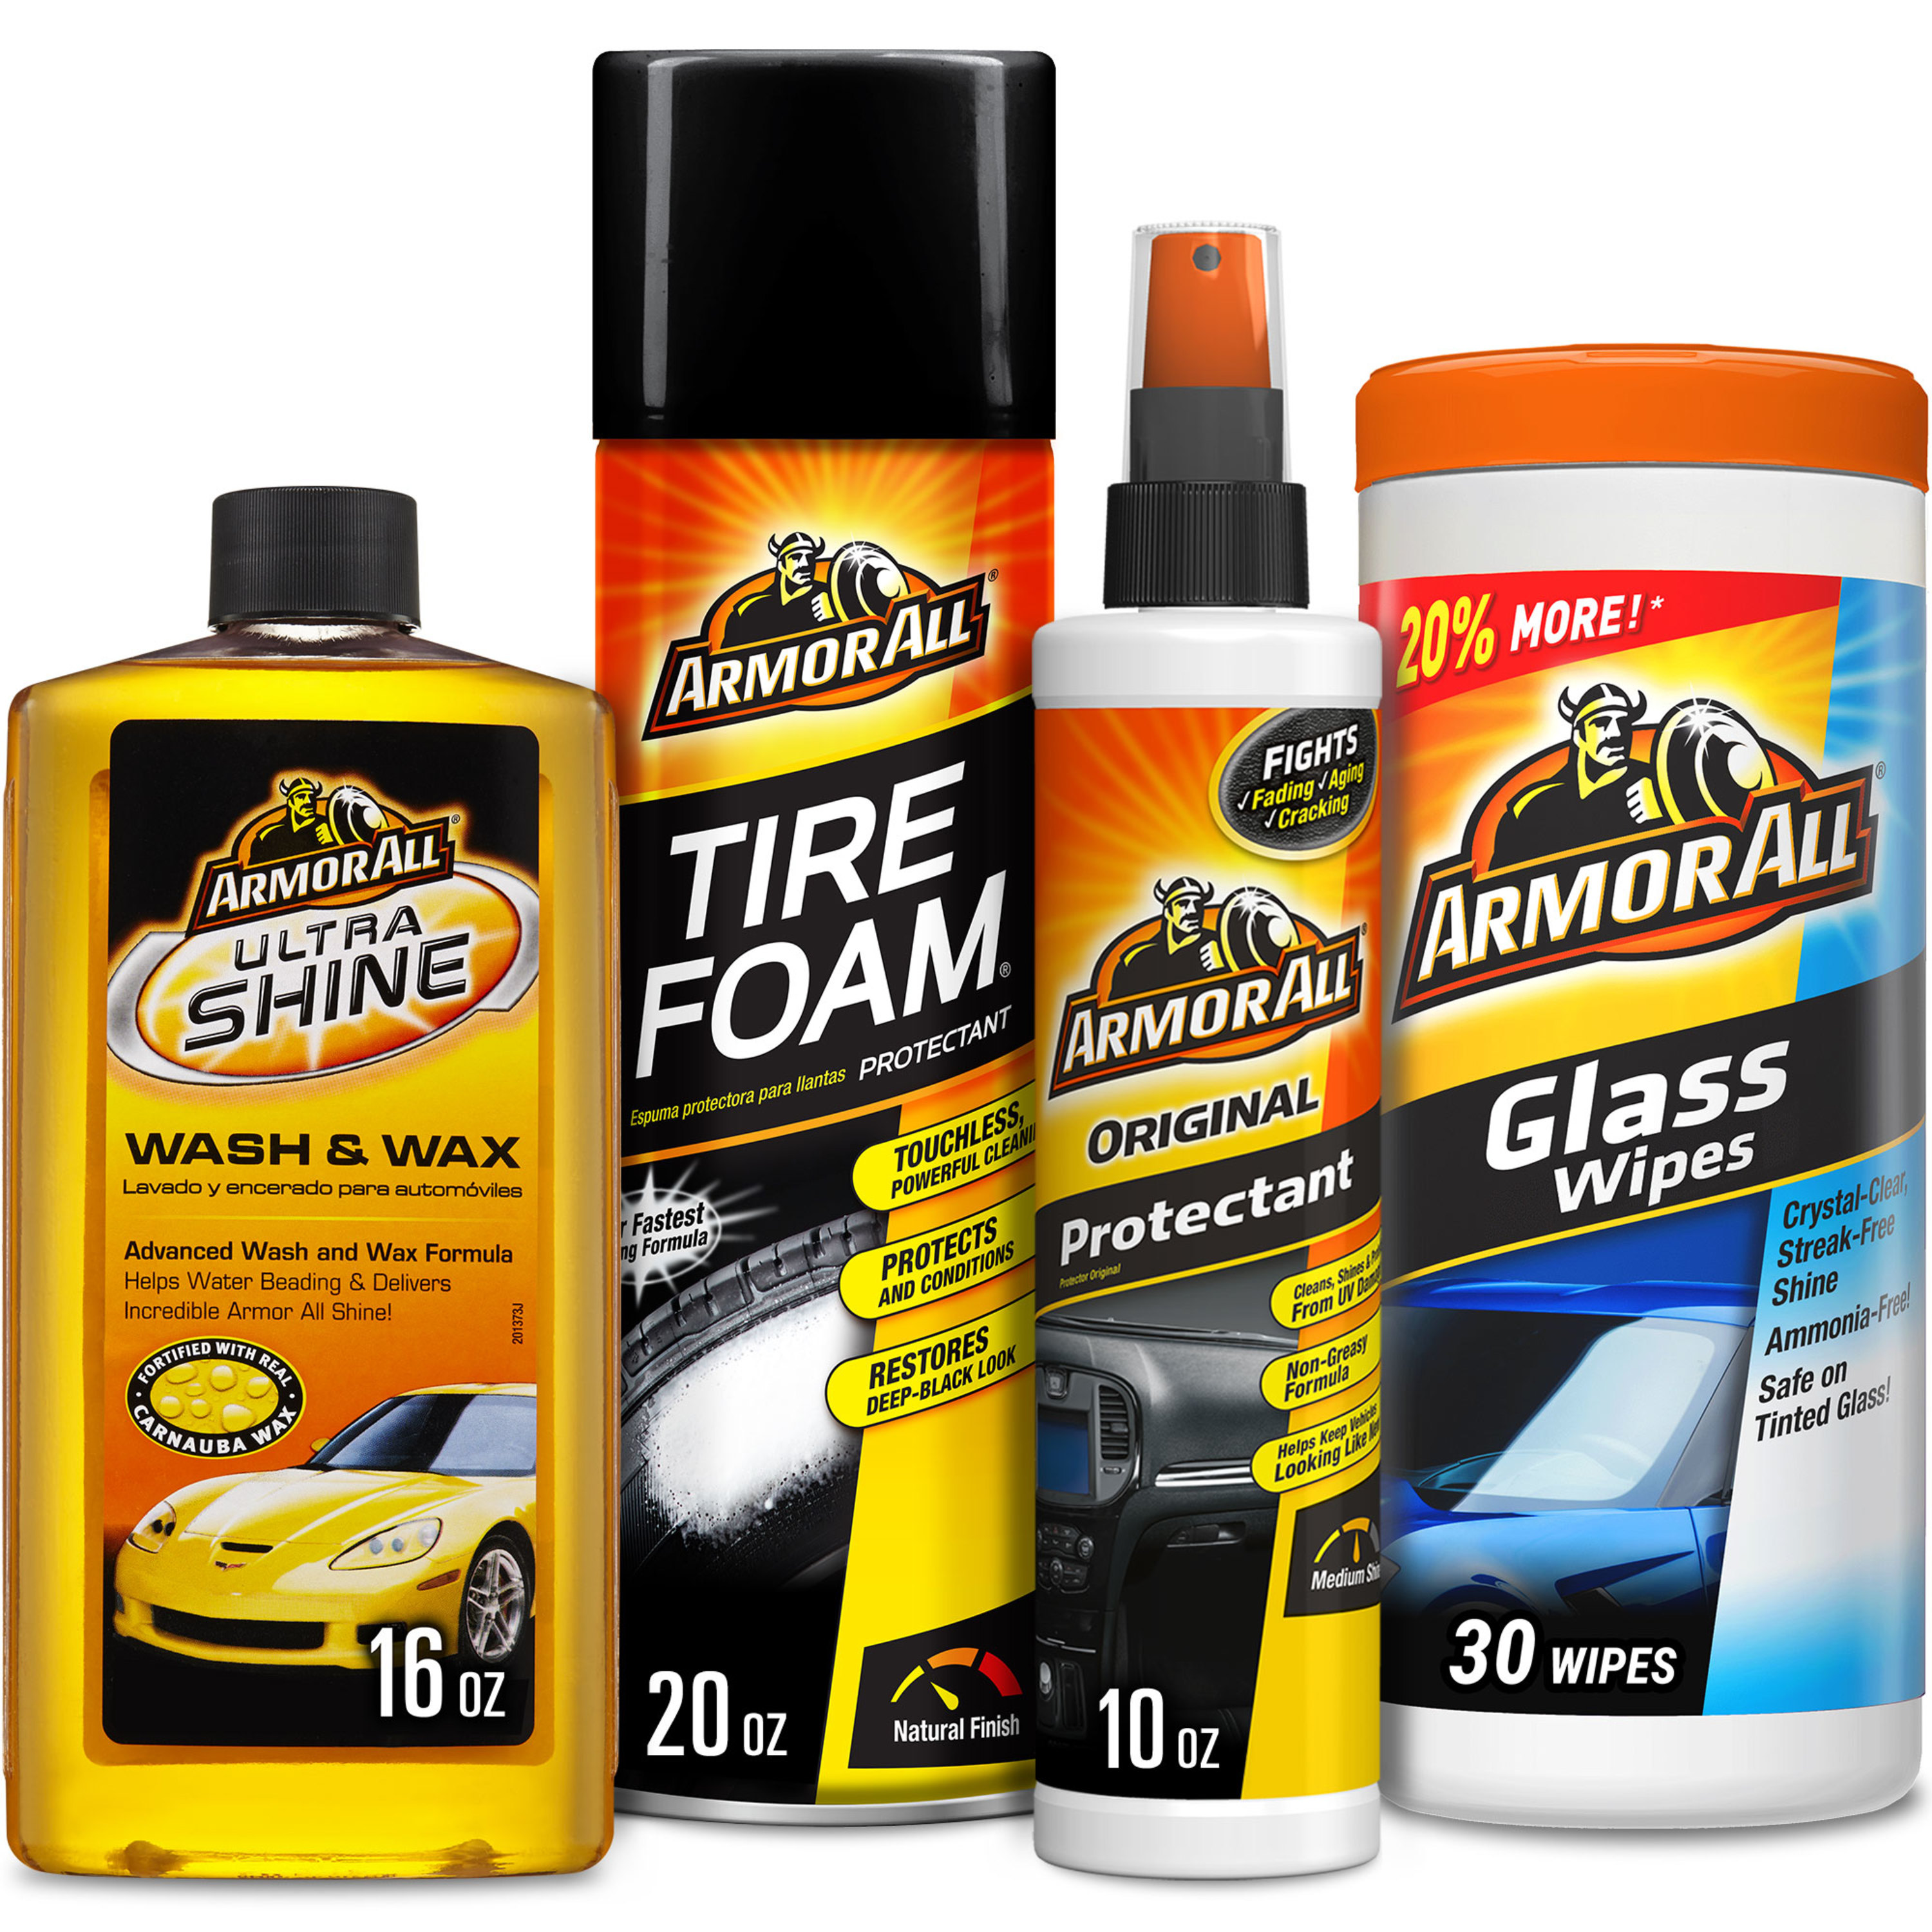 Armor All Complete Car Cleaning Car Care Kit (4 Pieces) - image 1 of 10